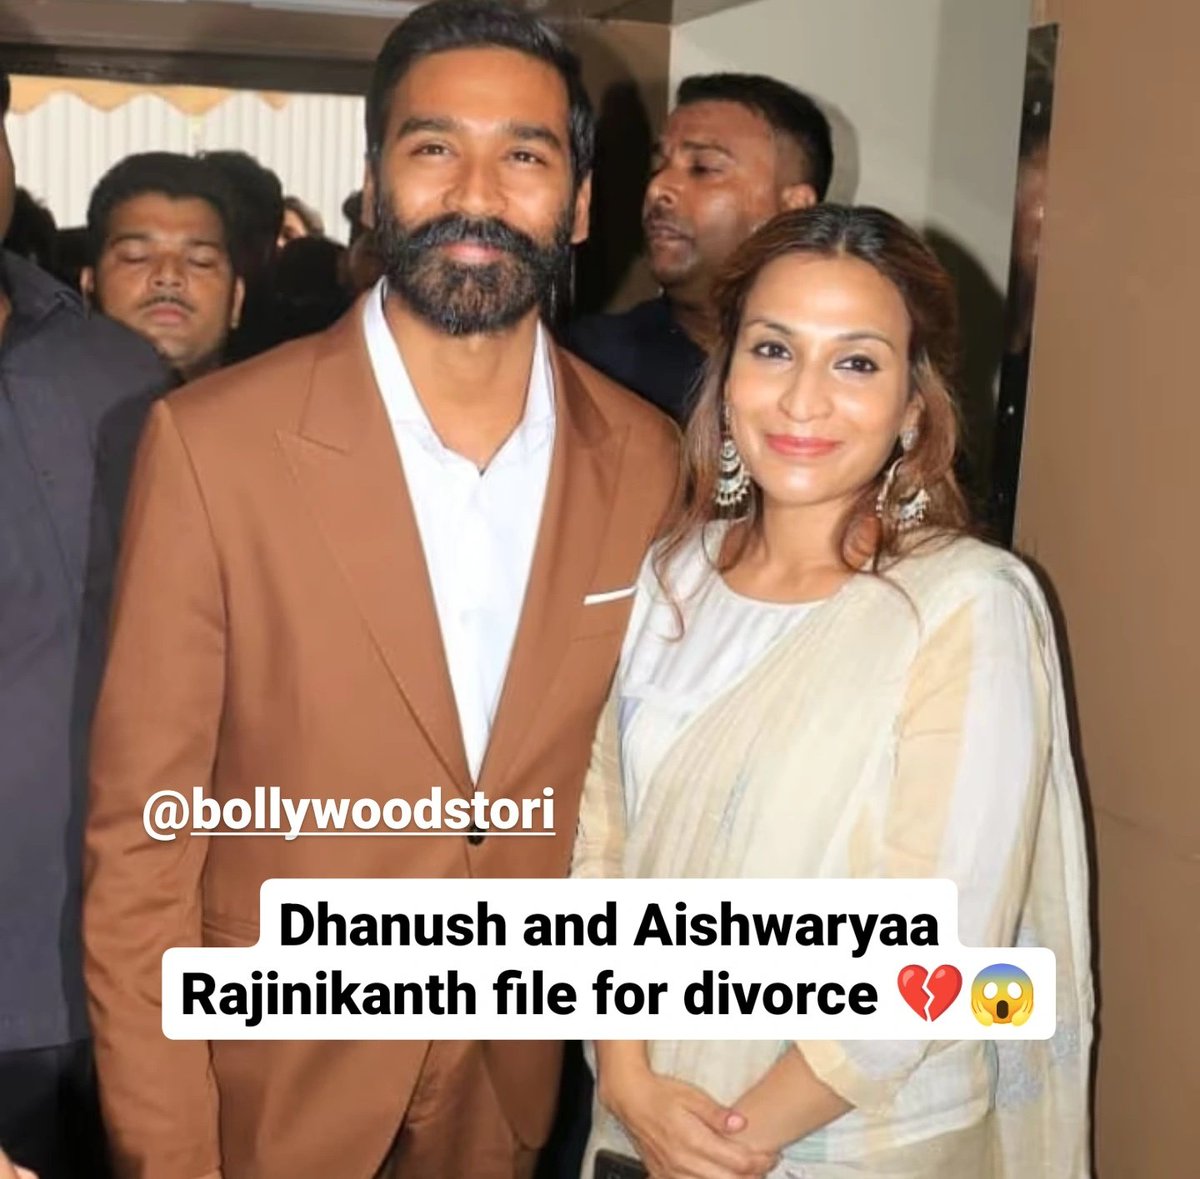 Dhanush and Aishwarya and have filed for divorce at the Chennai family court recently. The two announced their decision to part ways in January 2022.

Follow @bollywoodstori 😎
.
.
#bollywoodstori #dhanush #aishwarya #rajnikanth #divorce #shocking #bollywoodmovies #divorcequotes